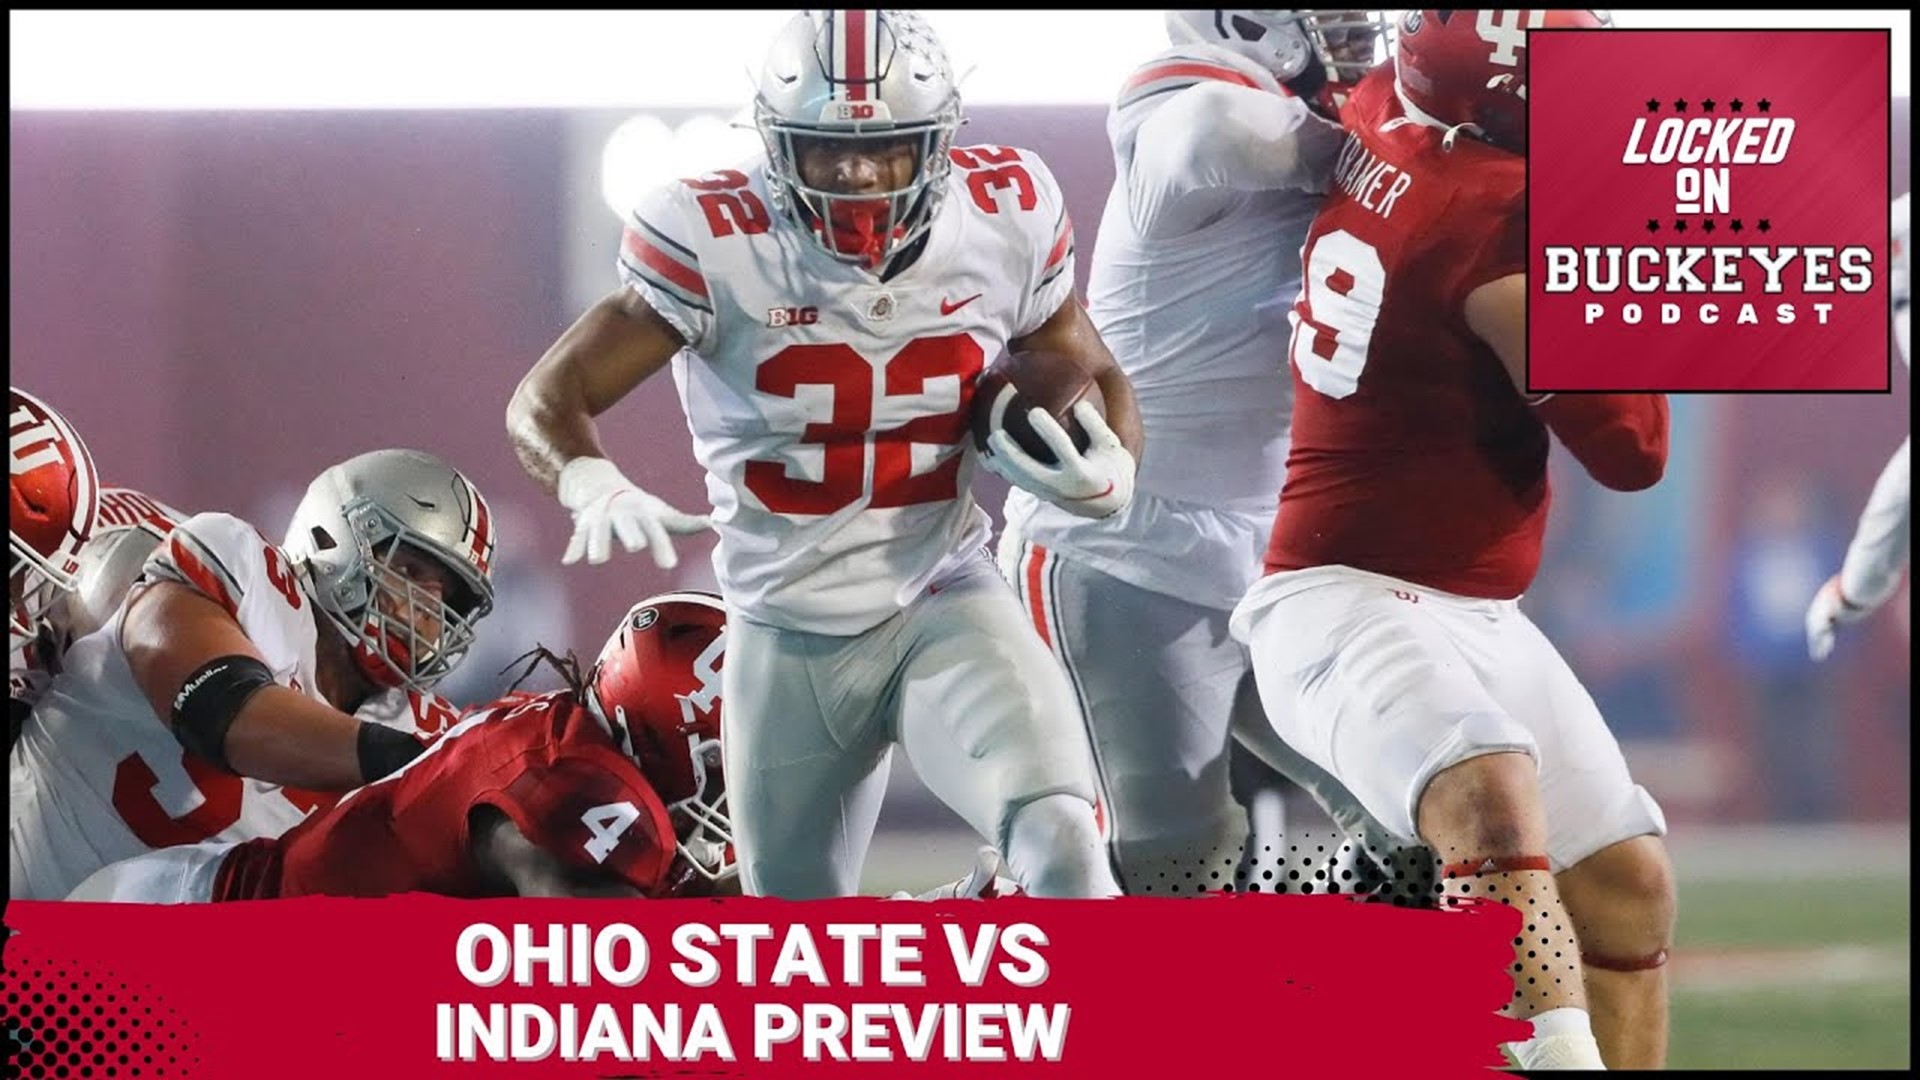 This week’s matchup is against a struggling Indiana Hoosiers football team.